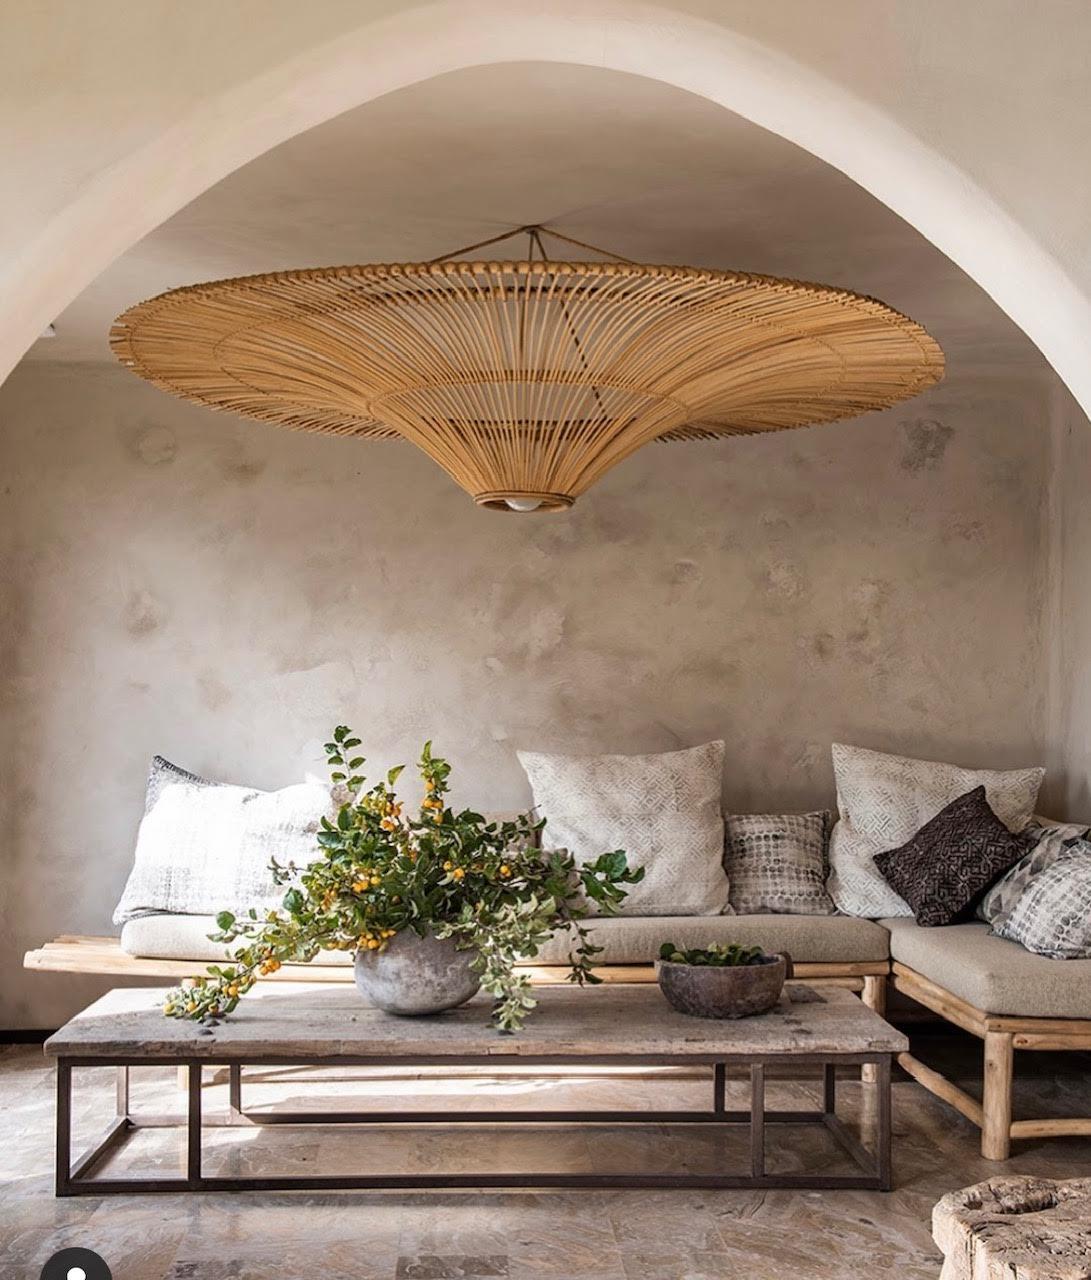 Large Umbrella Shaped Bamboo Chandelier, Indonesia, Contemporary In New Condition For Sale In New York, NY